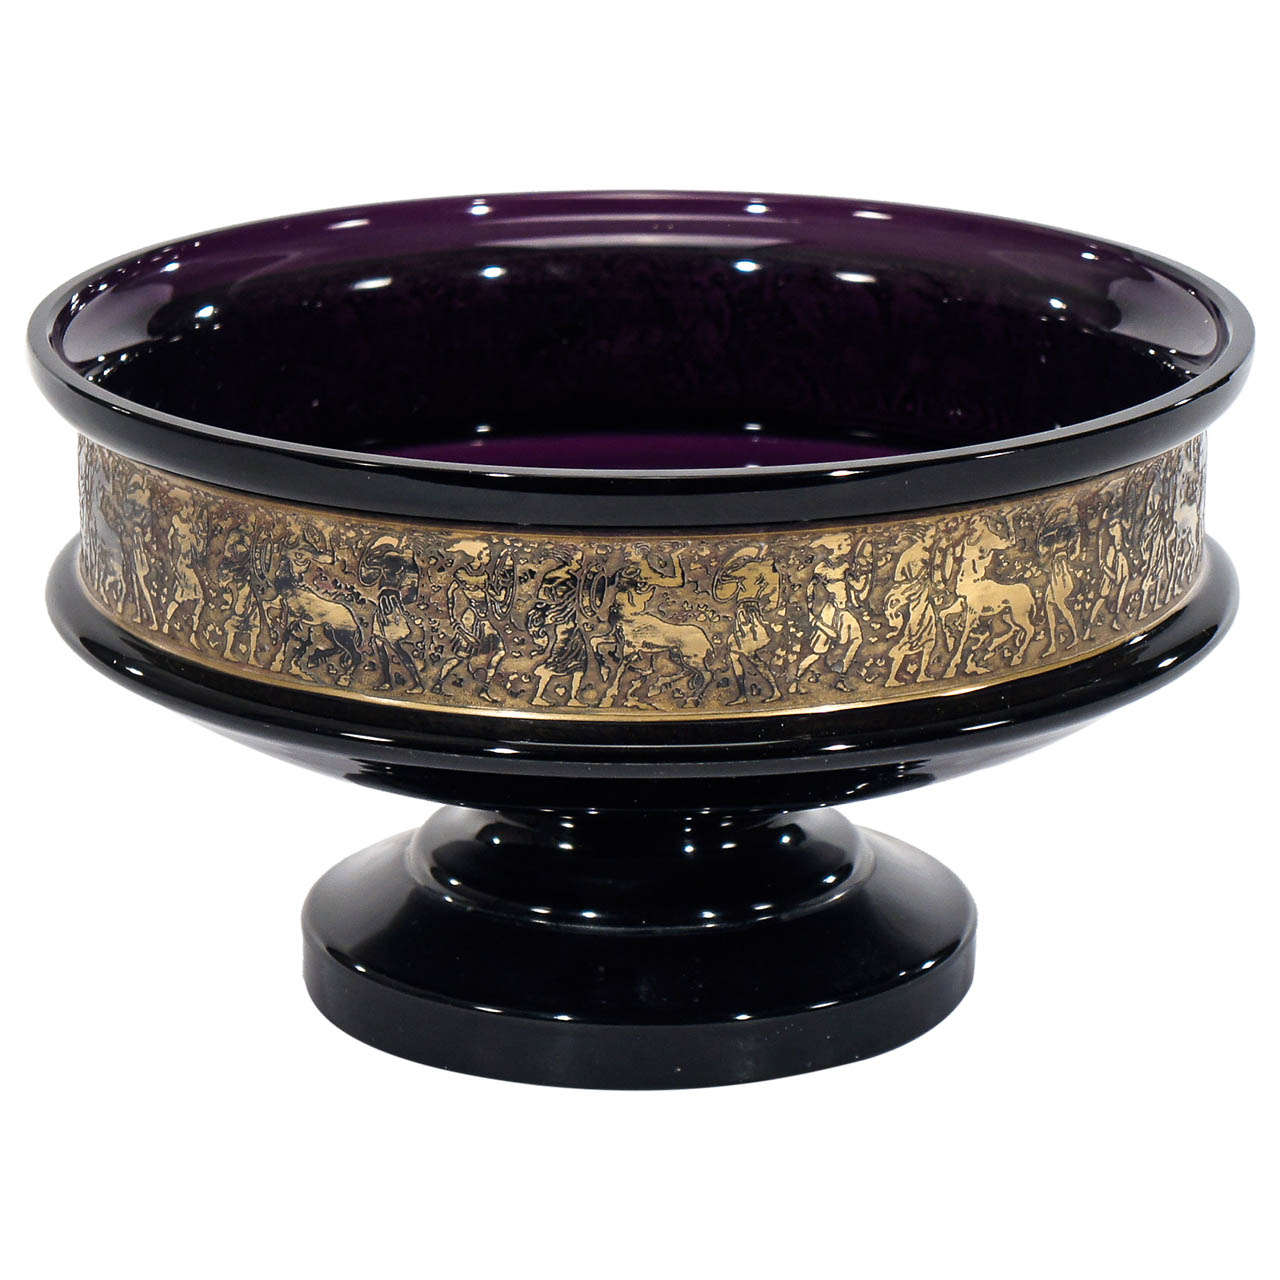 Signed 19th Century Moser Amethyst Crystal Footed Bowl with Gilded Cameo Frieze